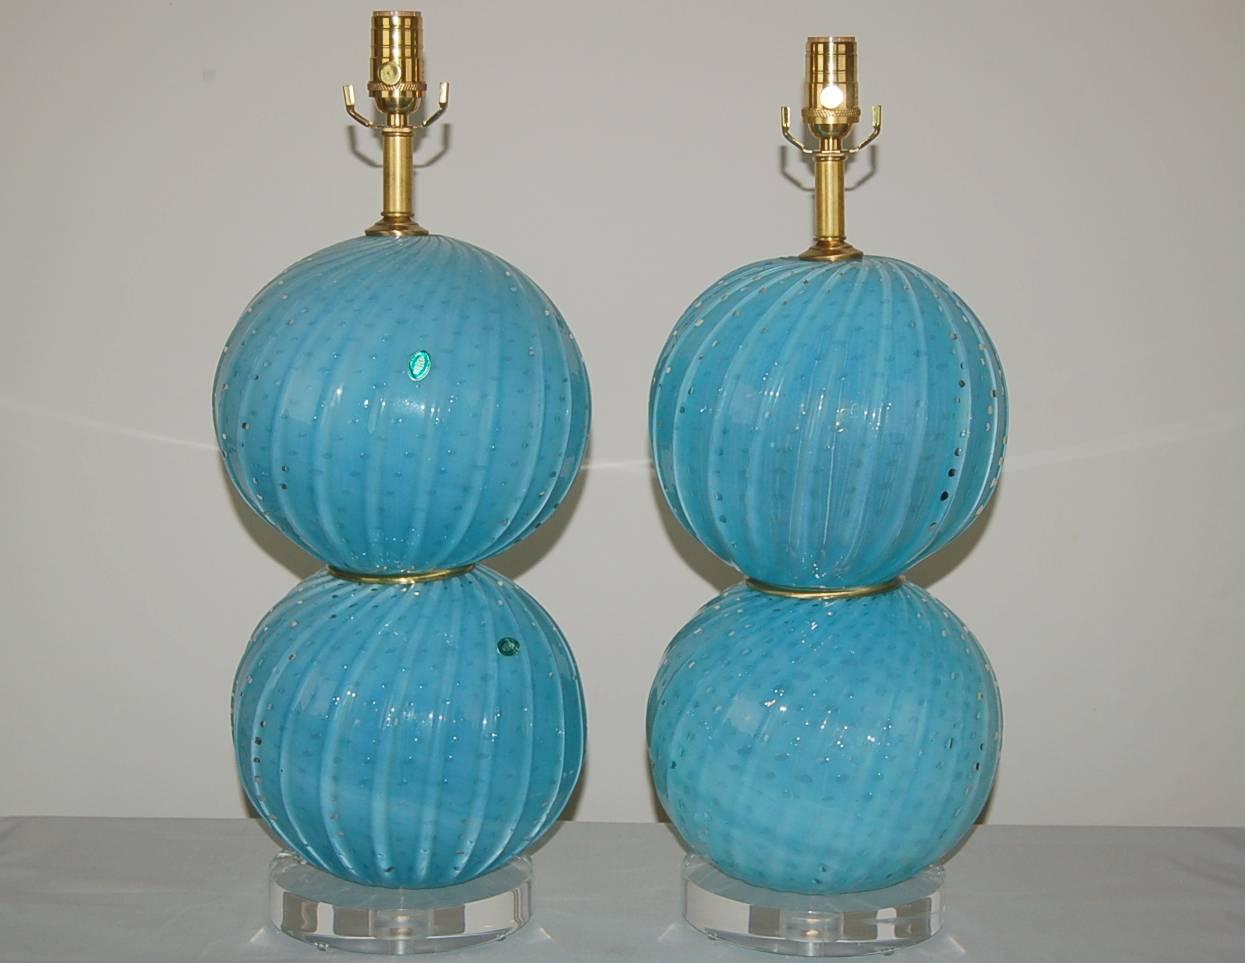 Matched pair of vintage Murano table lamps by Alfredo Barbini, in an intence AQUA BLUE OPALINE. Each ball has thick diagonal ribs and is filled with controlled bubbles, not to mention the ethereal aura of color, thanks to the Opaline. 

Lamps